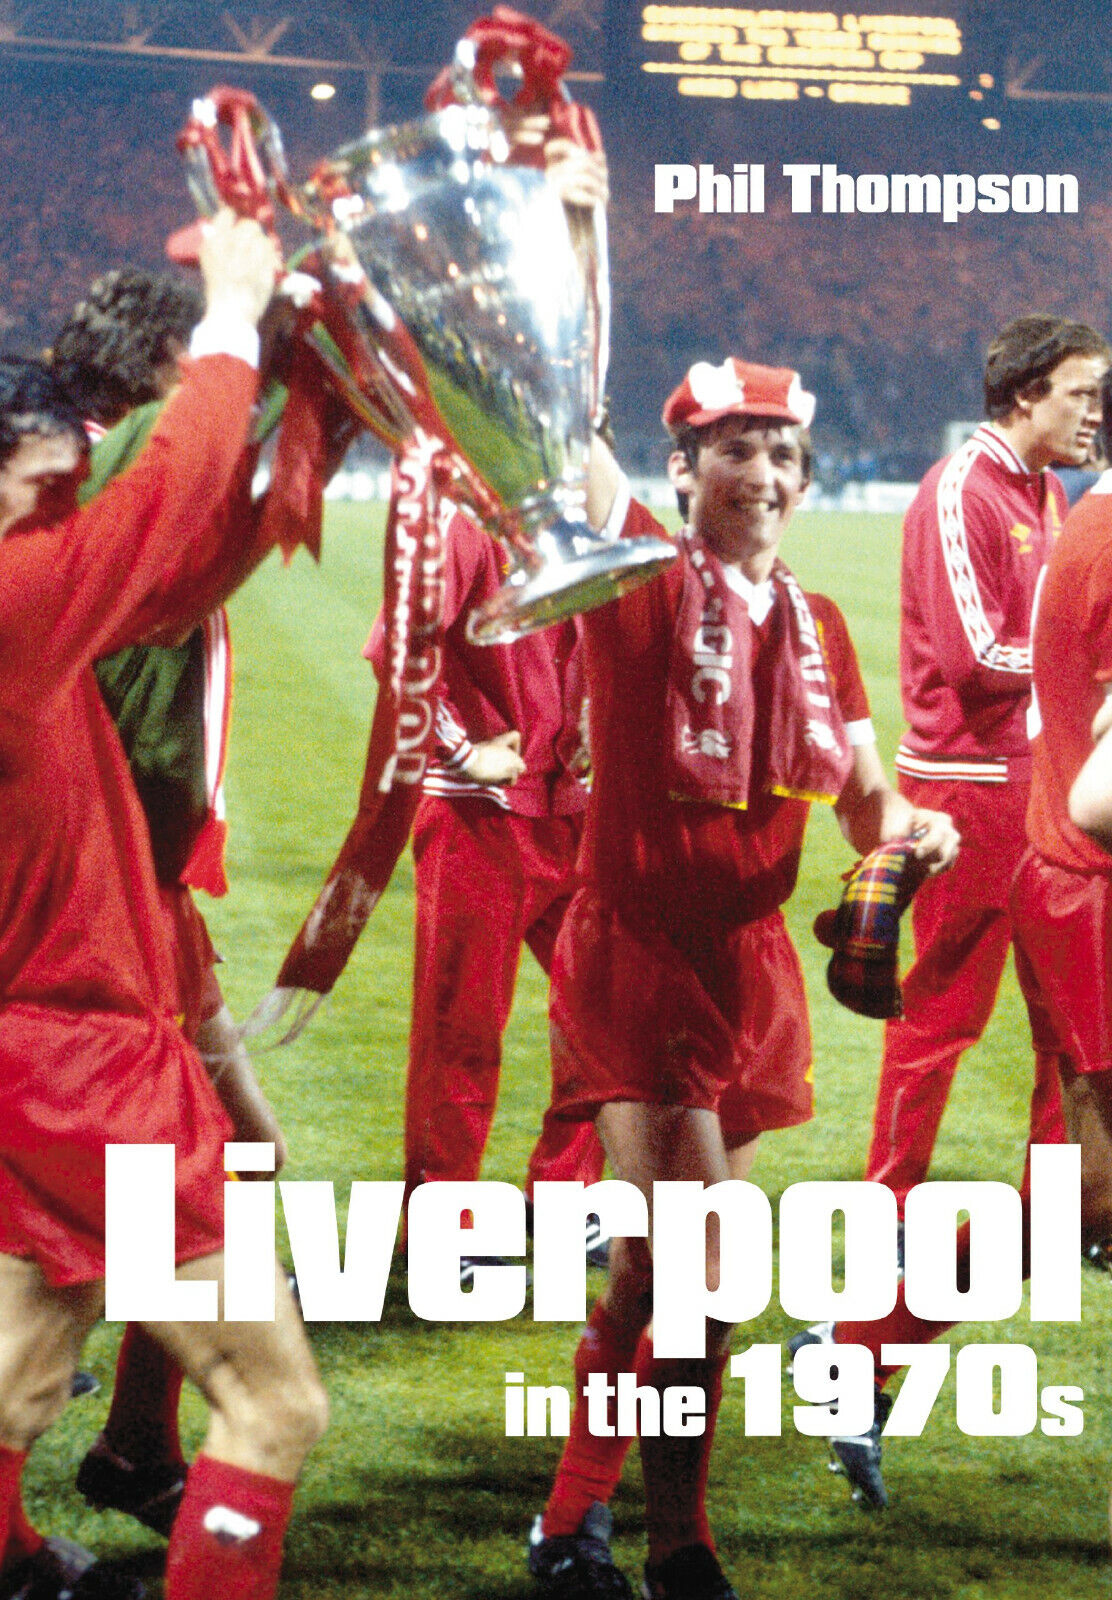 Liverpool in the 1970s - Phil Thompson - The History Press, 2005